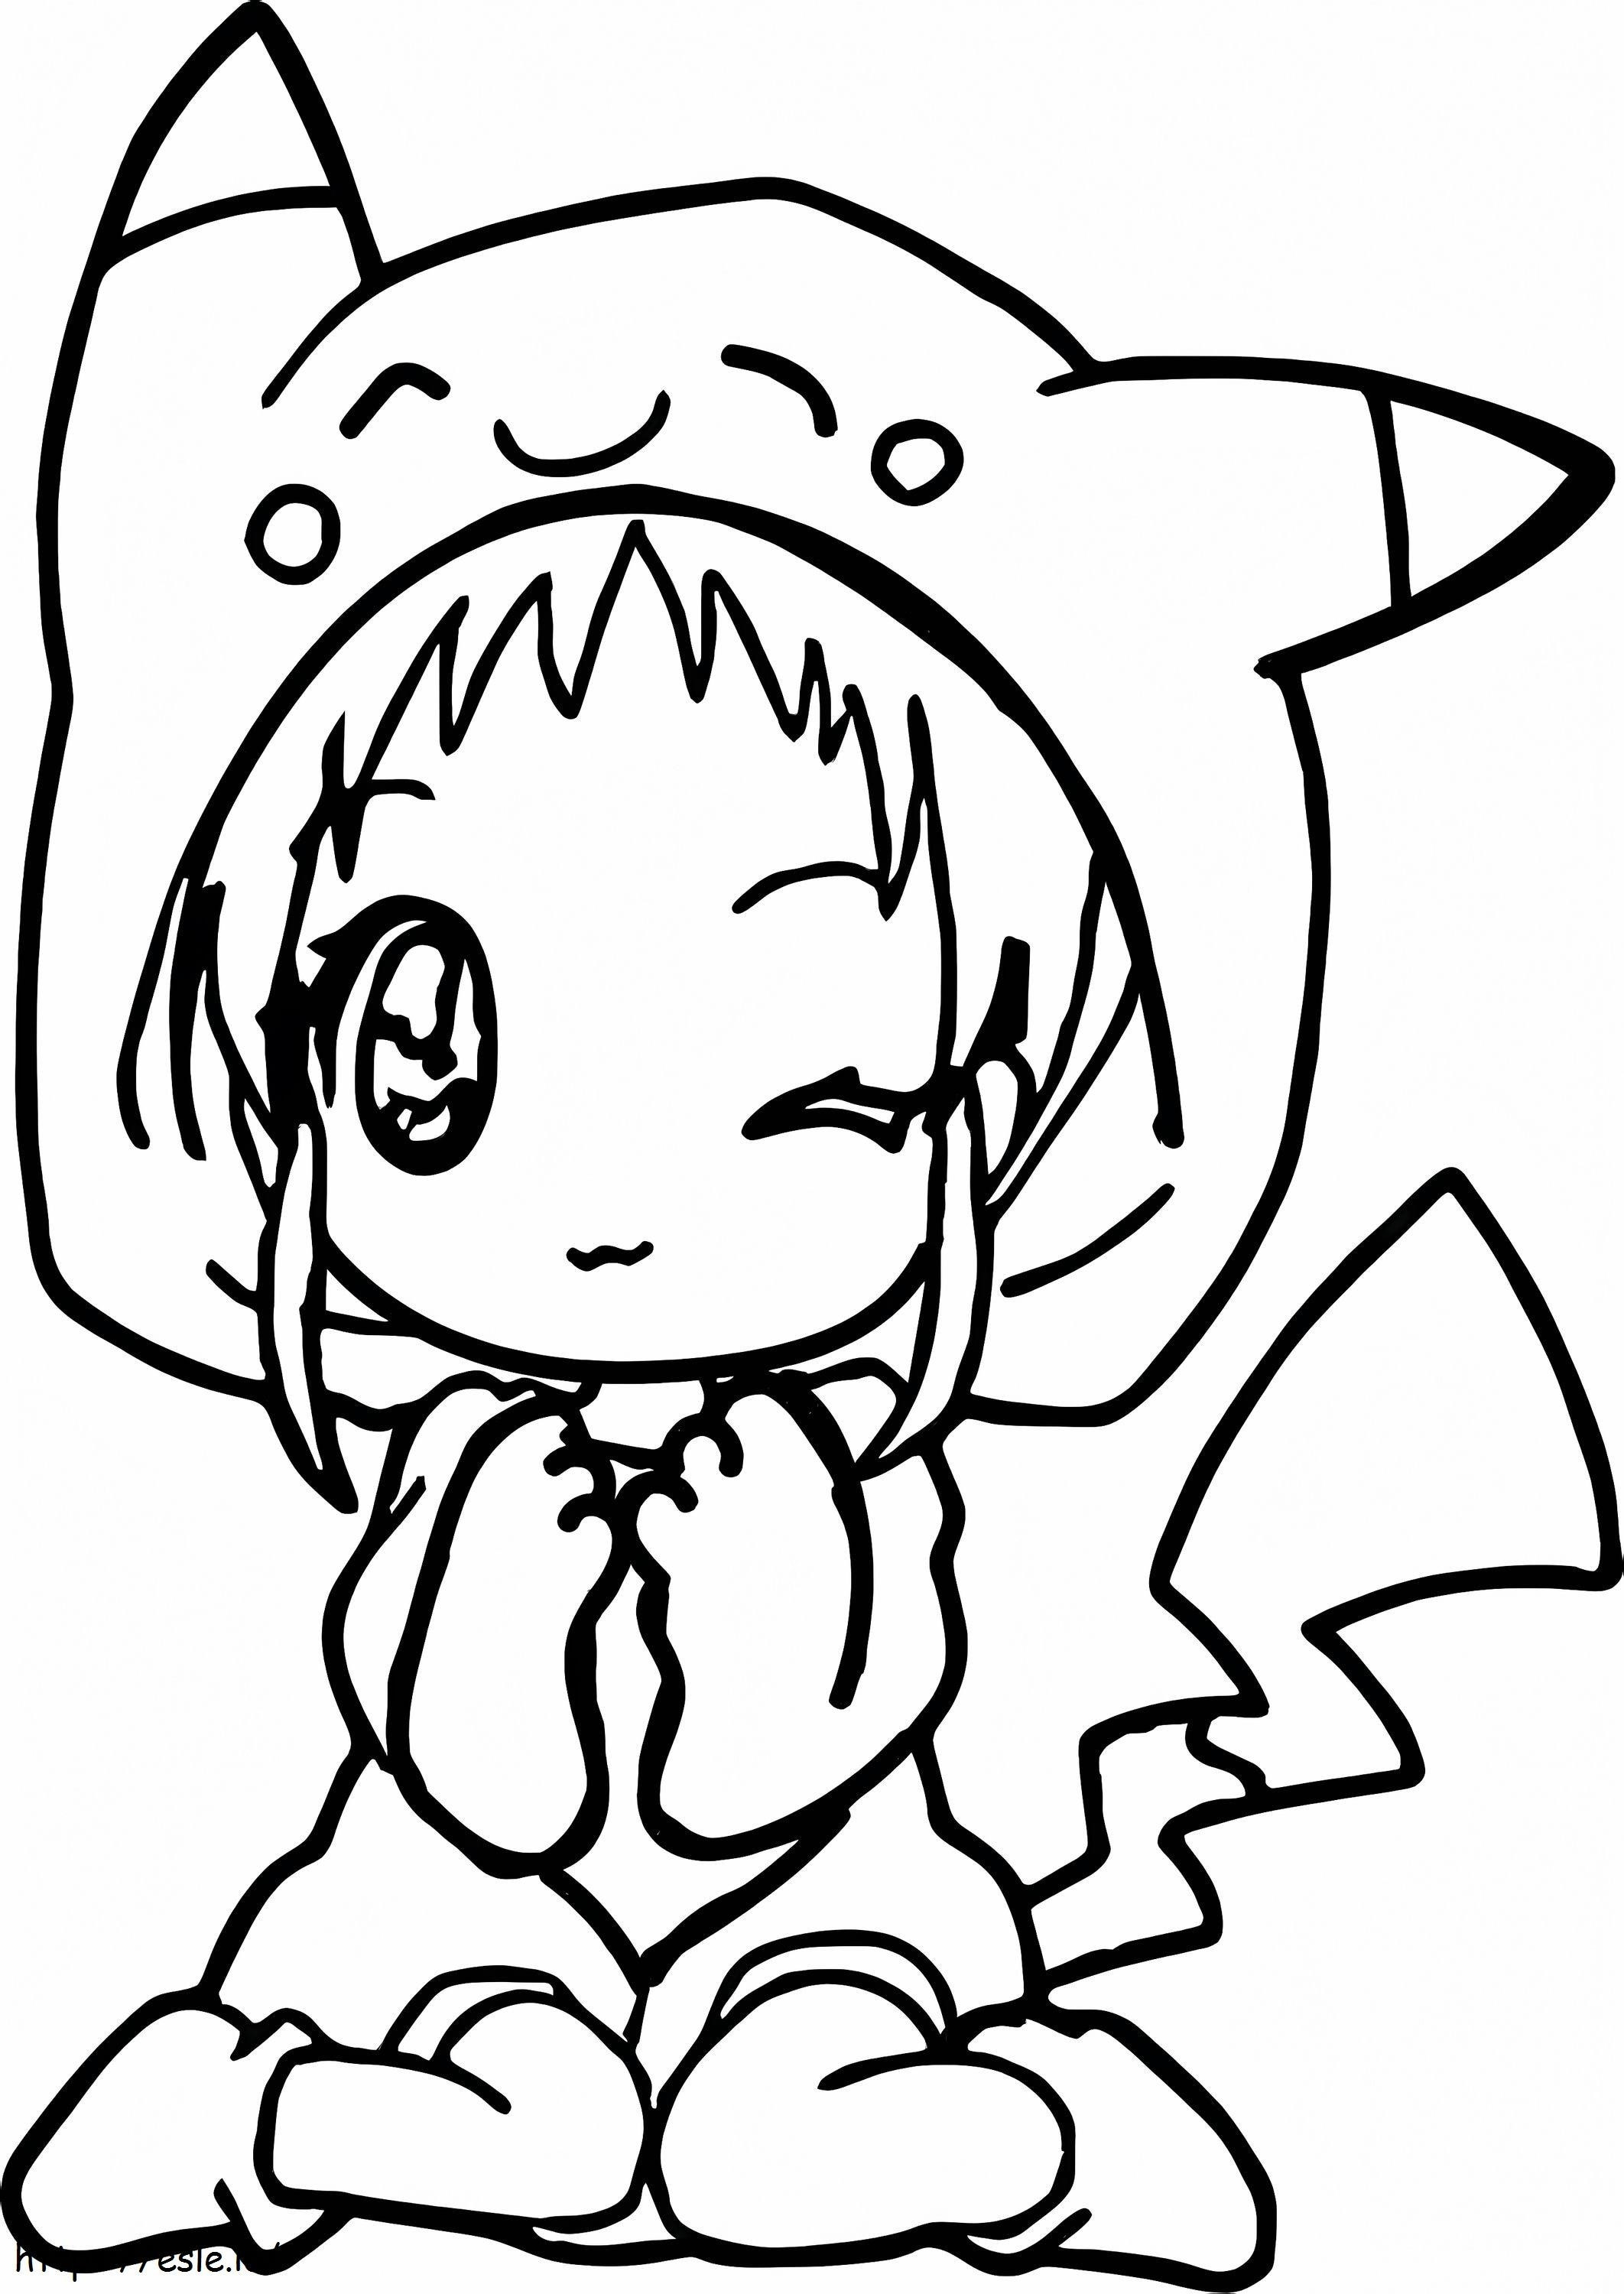 Girl With Pikachu Hat coloring page